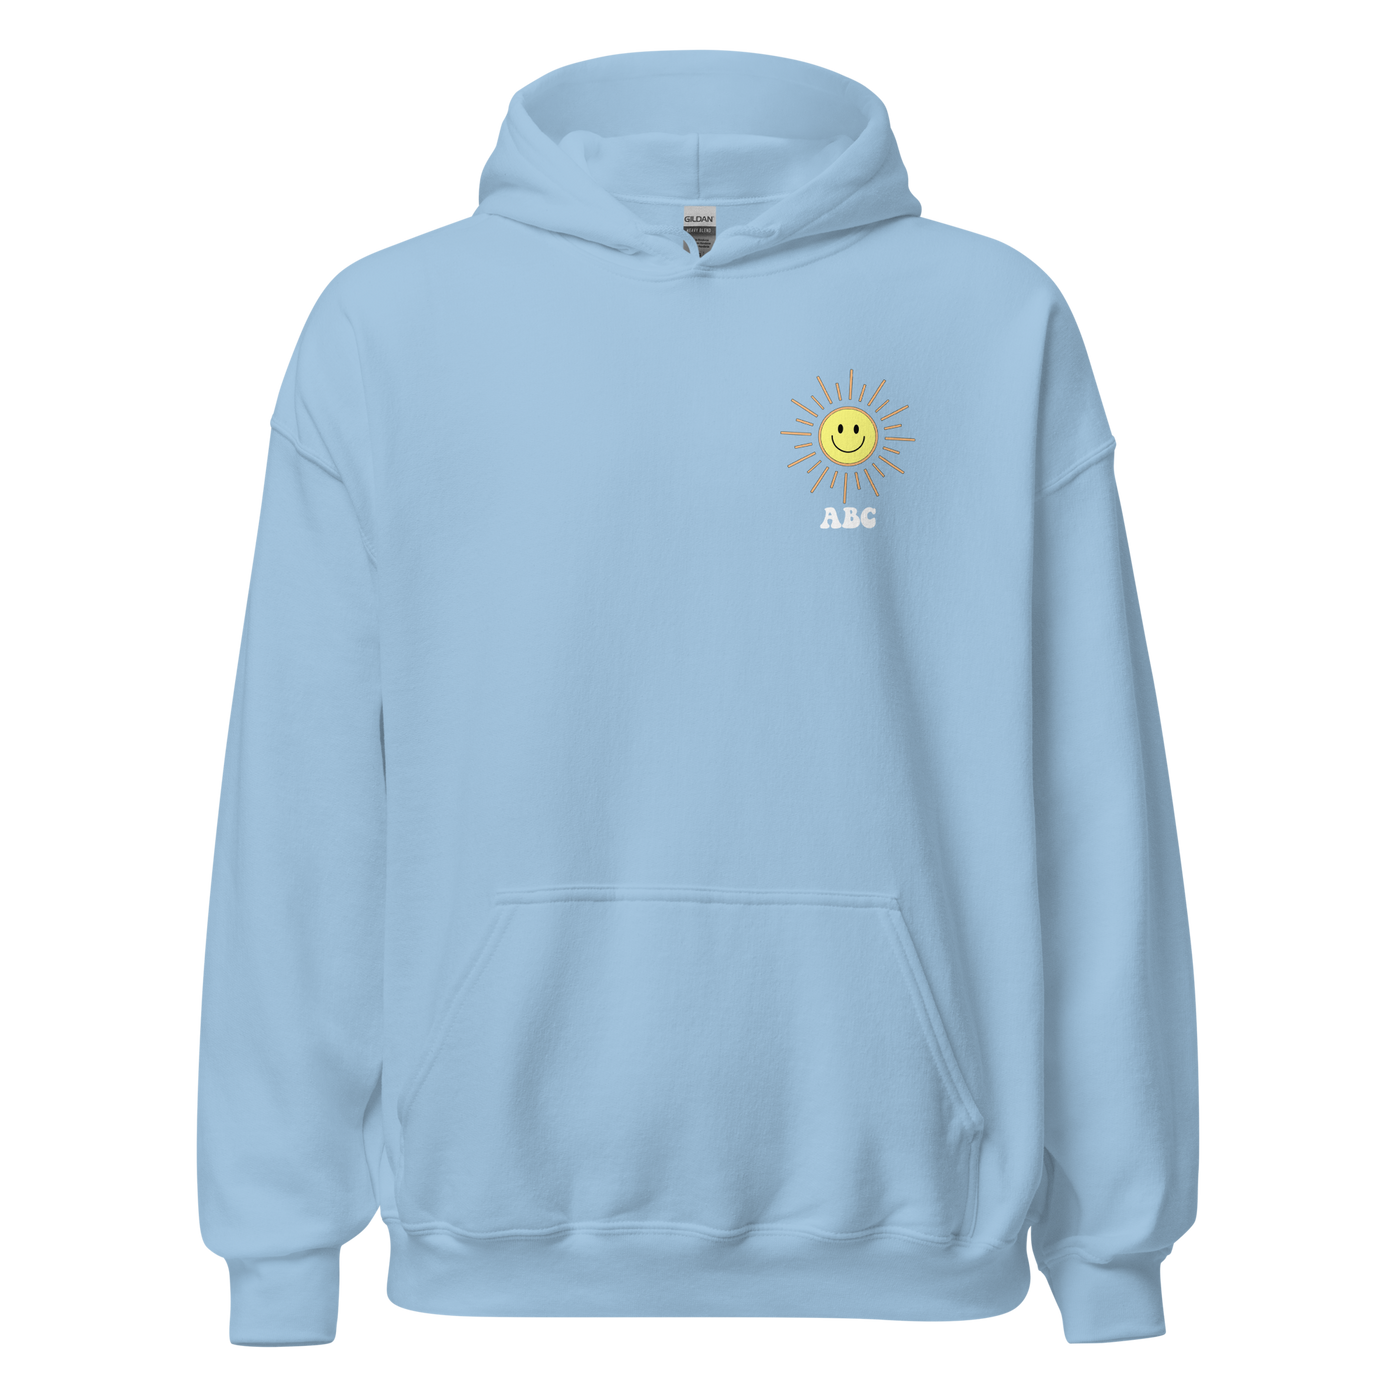 Make It Yours™ 'Here Comes The Sun' Front & Back Hoodie